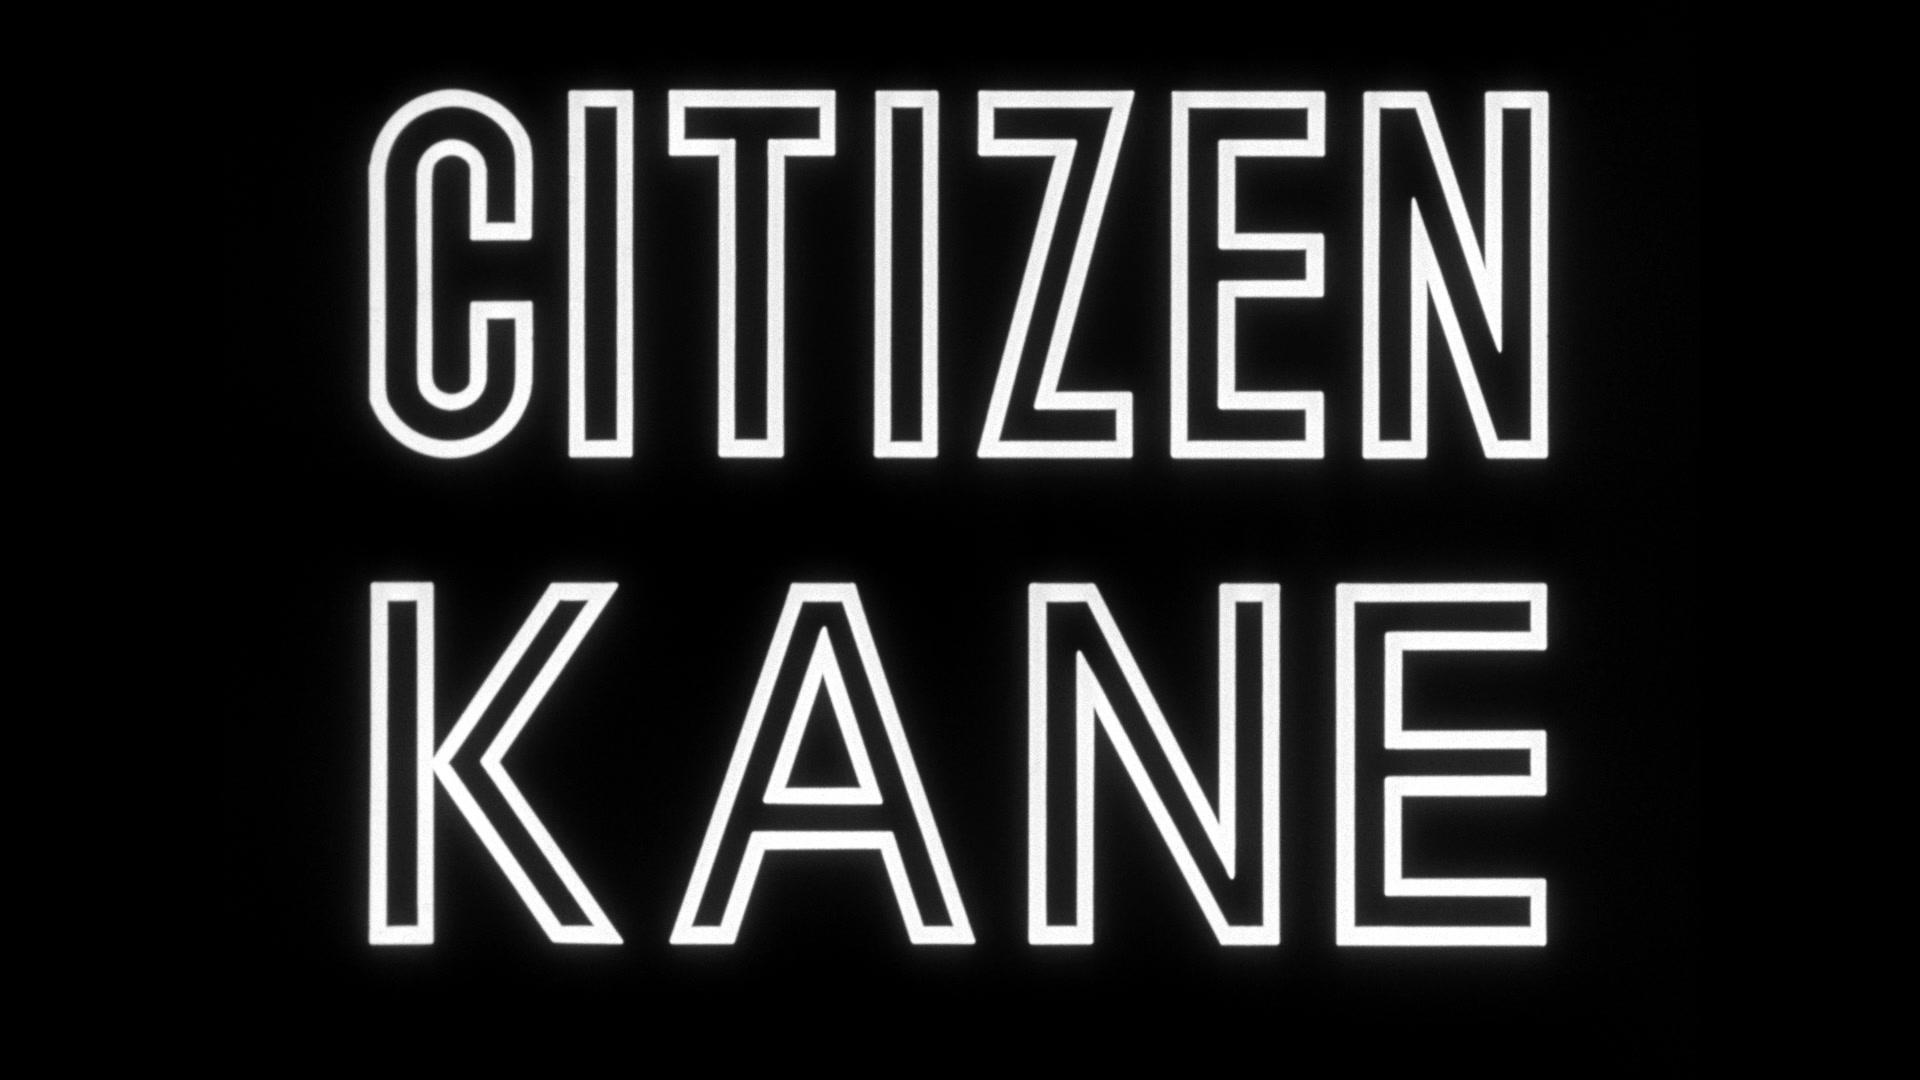 Citizen Kane. Film and Television